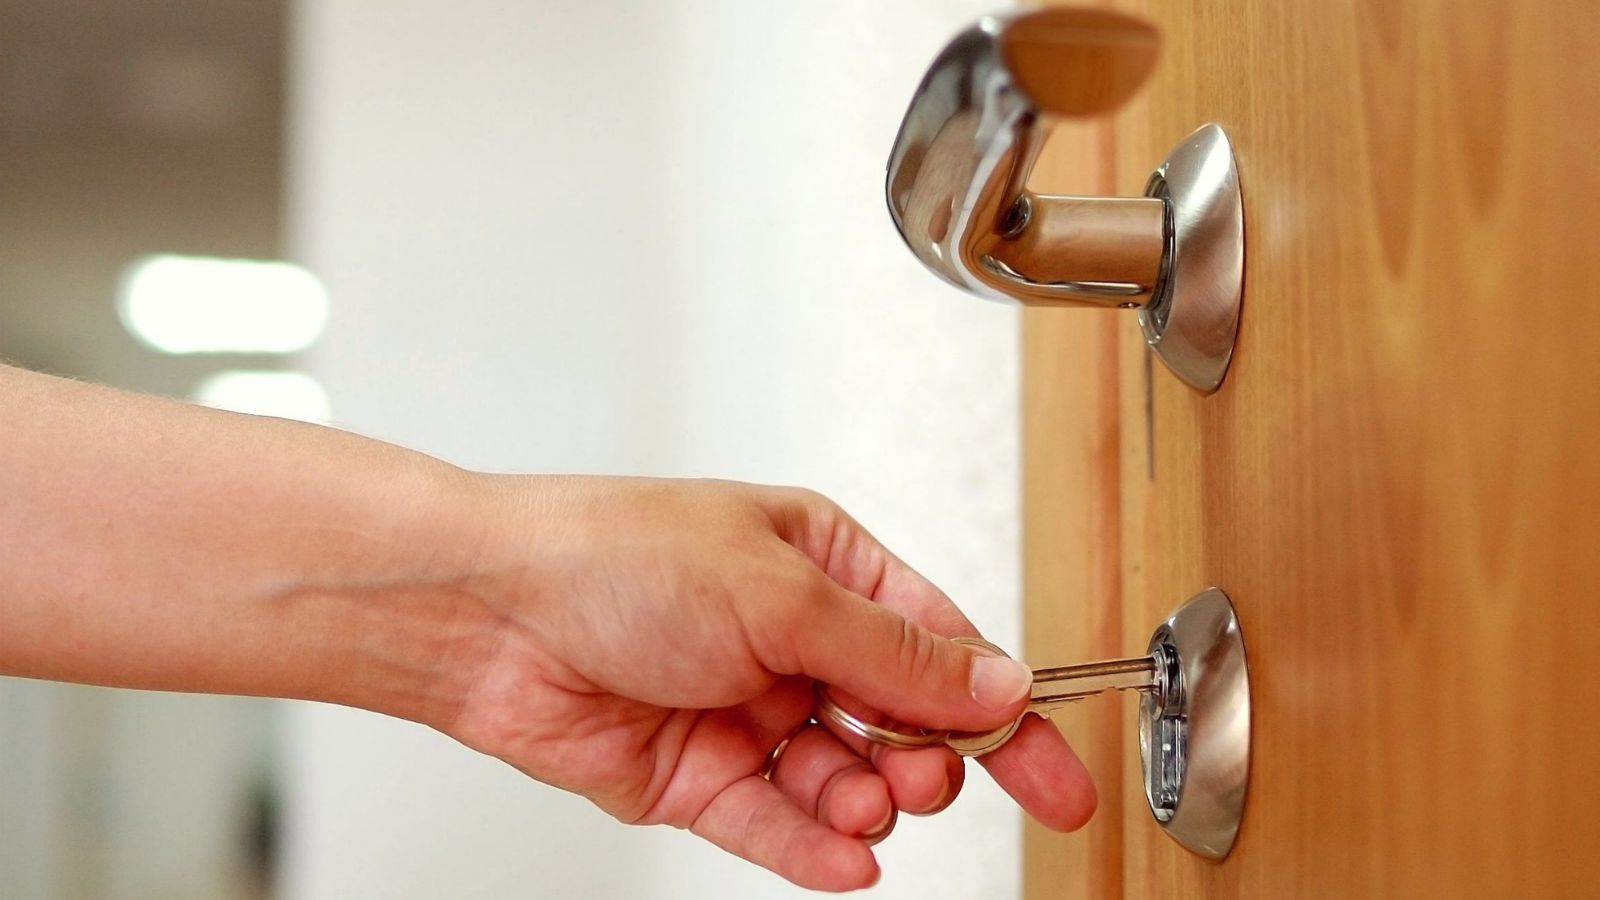 What are some signs that you need to hire a locksmith?